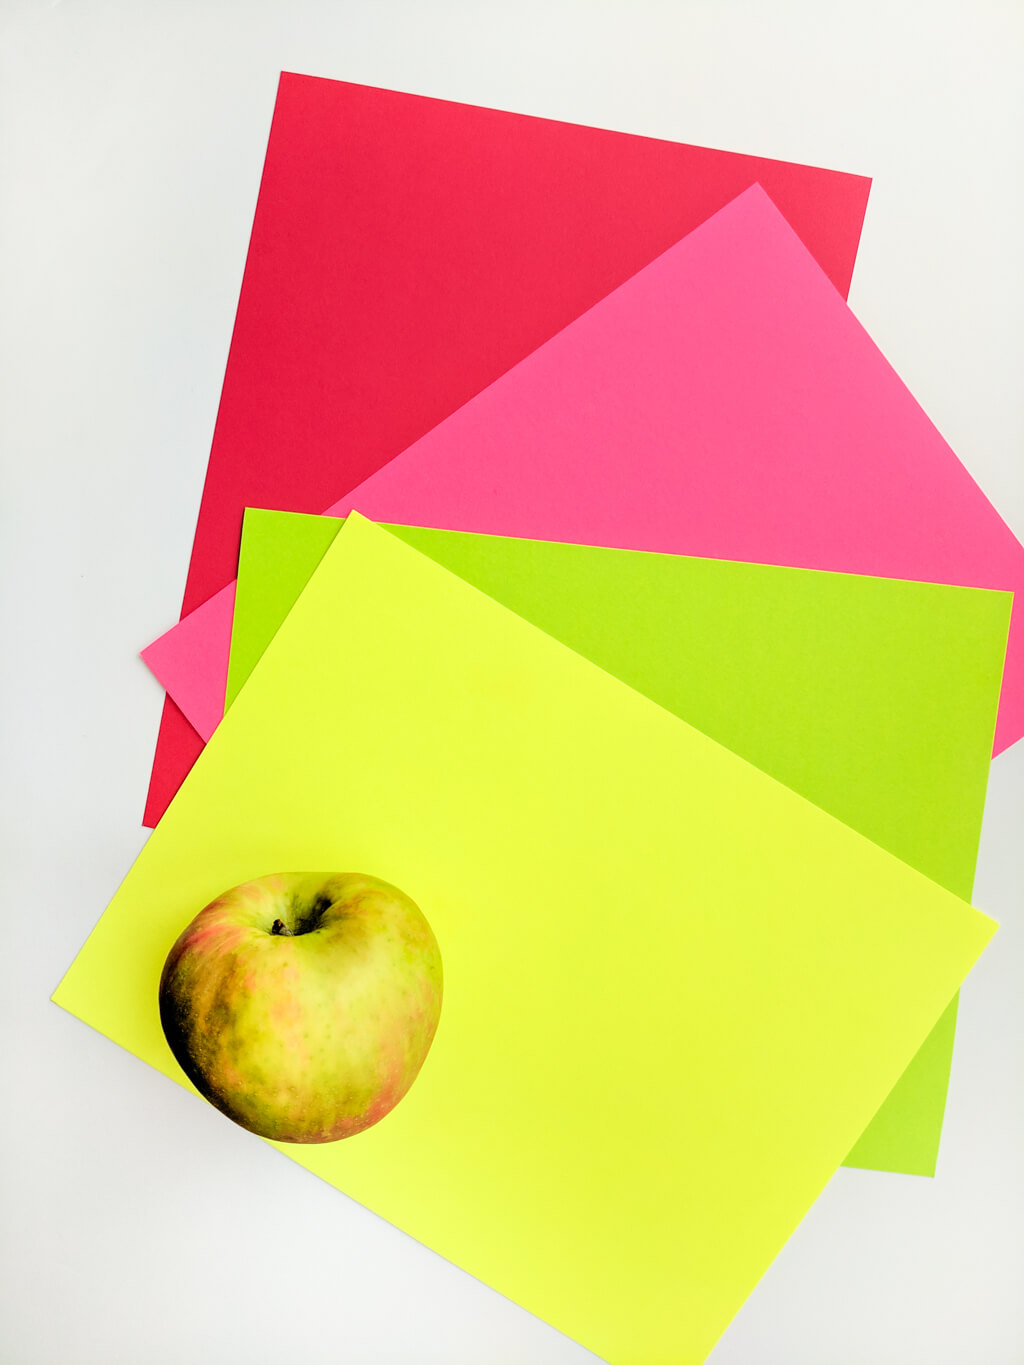 Apples fall color palette: Re-Entry Red™, Plasma Pink™, Terra Green™ and Lift-Off Lemon™ from Astrobrights #spon